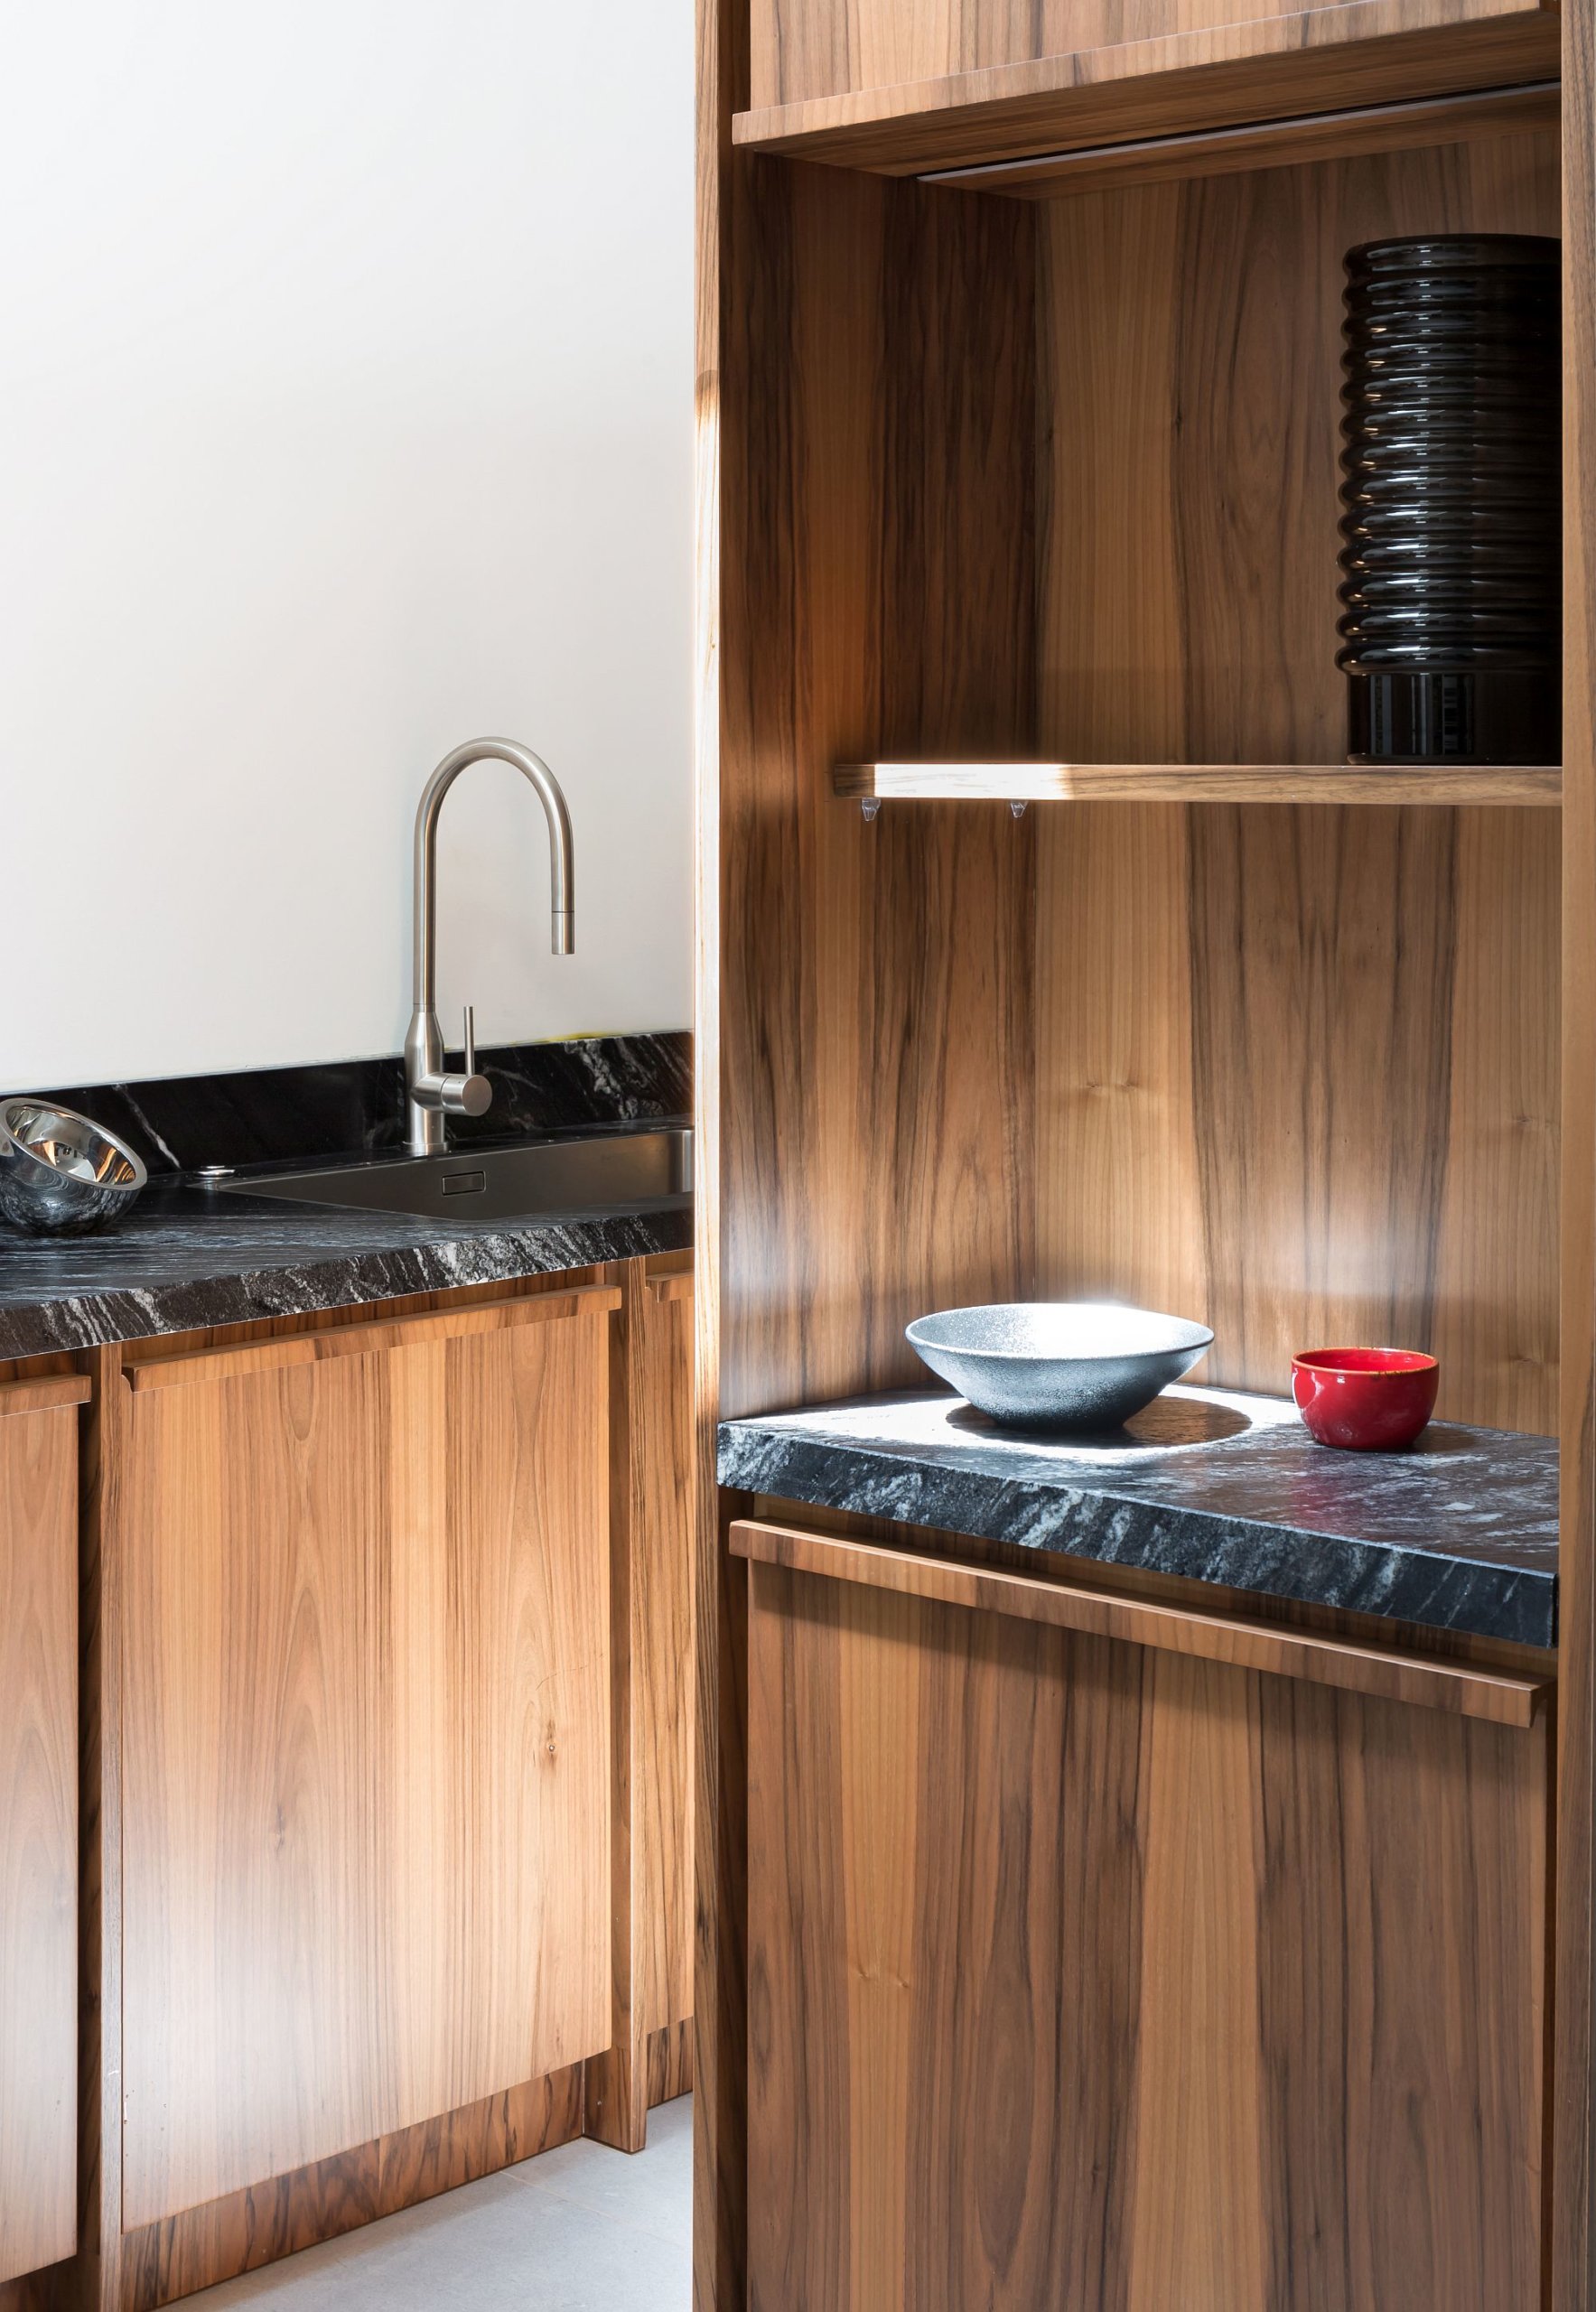 Natural black granite worktops in the kitchen coupled with wooden cabinets create a fabulous atmosphere